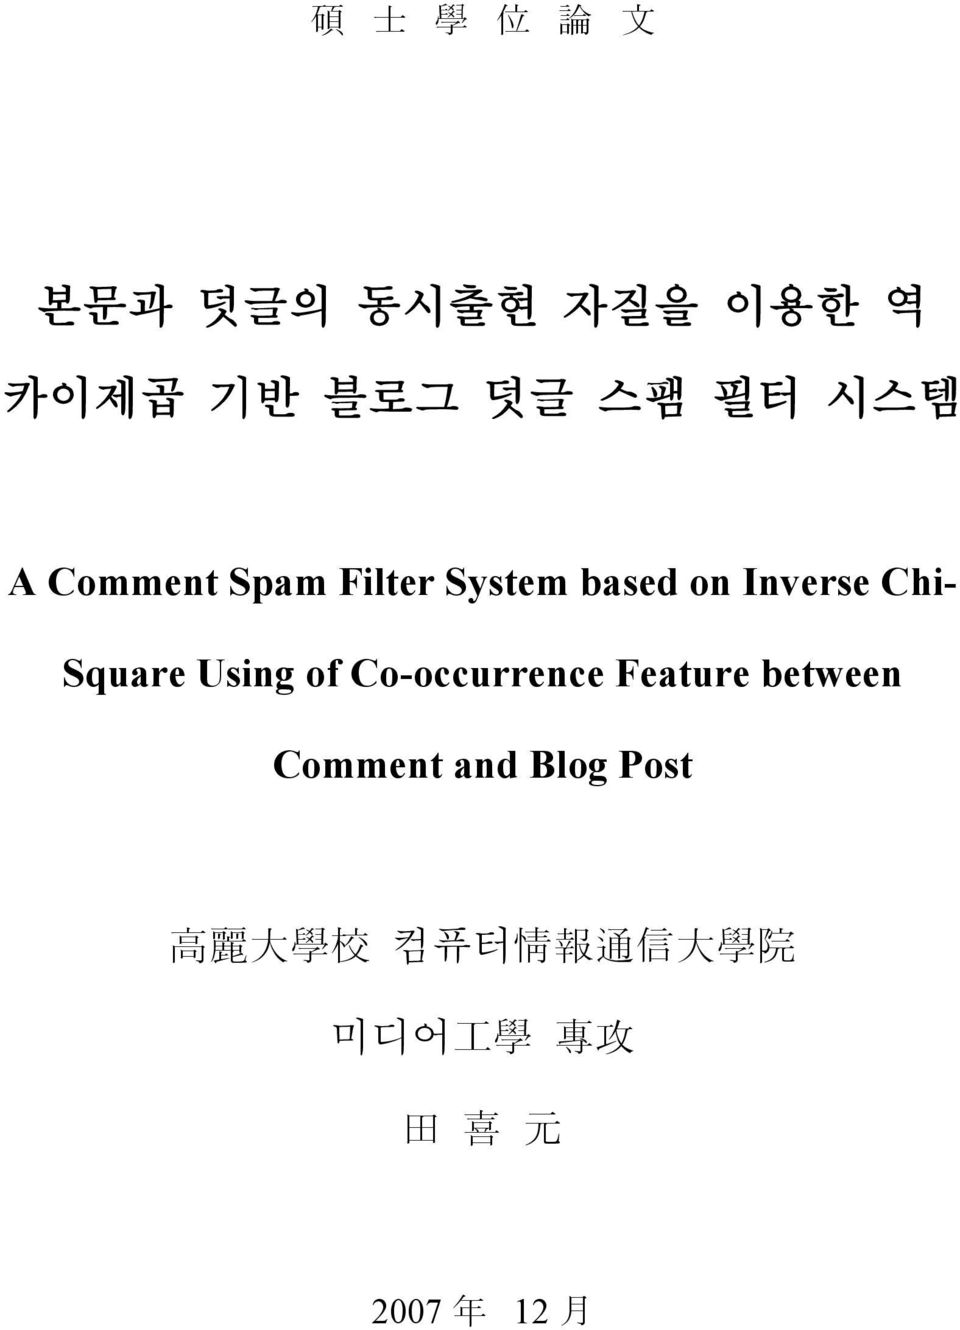 Square Using of Co-occurrence Feature between Comment and